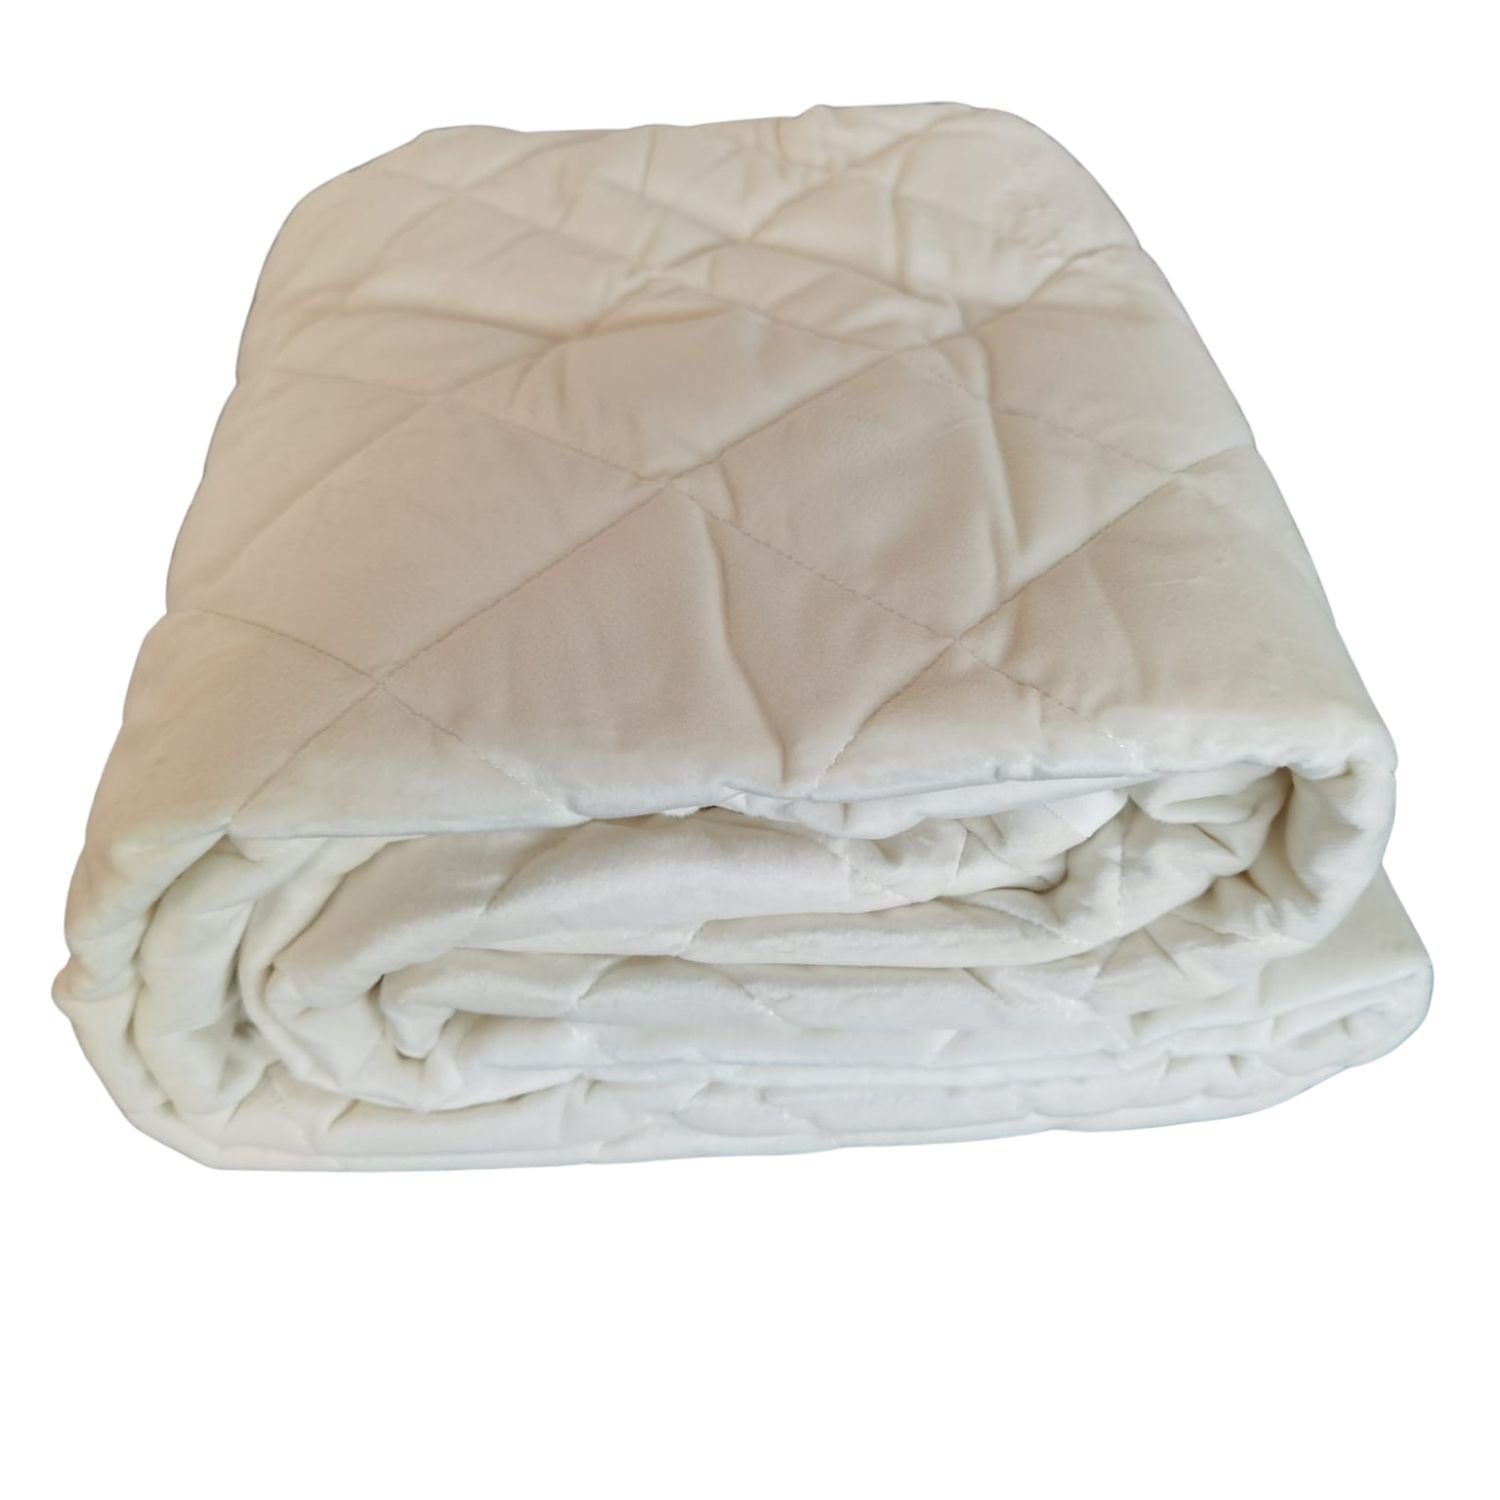 The Home Bedroom Fleece Mattress Protector - White - Super King 1 Shaws Department Stores